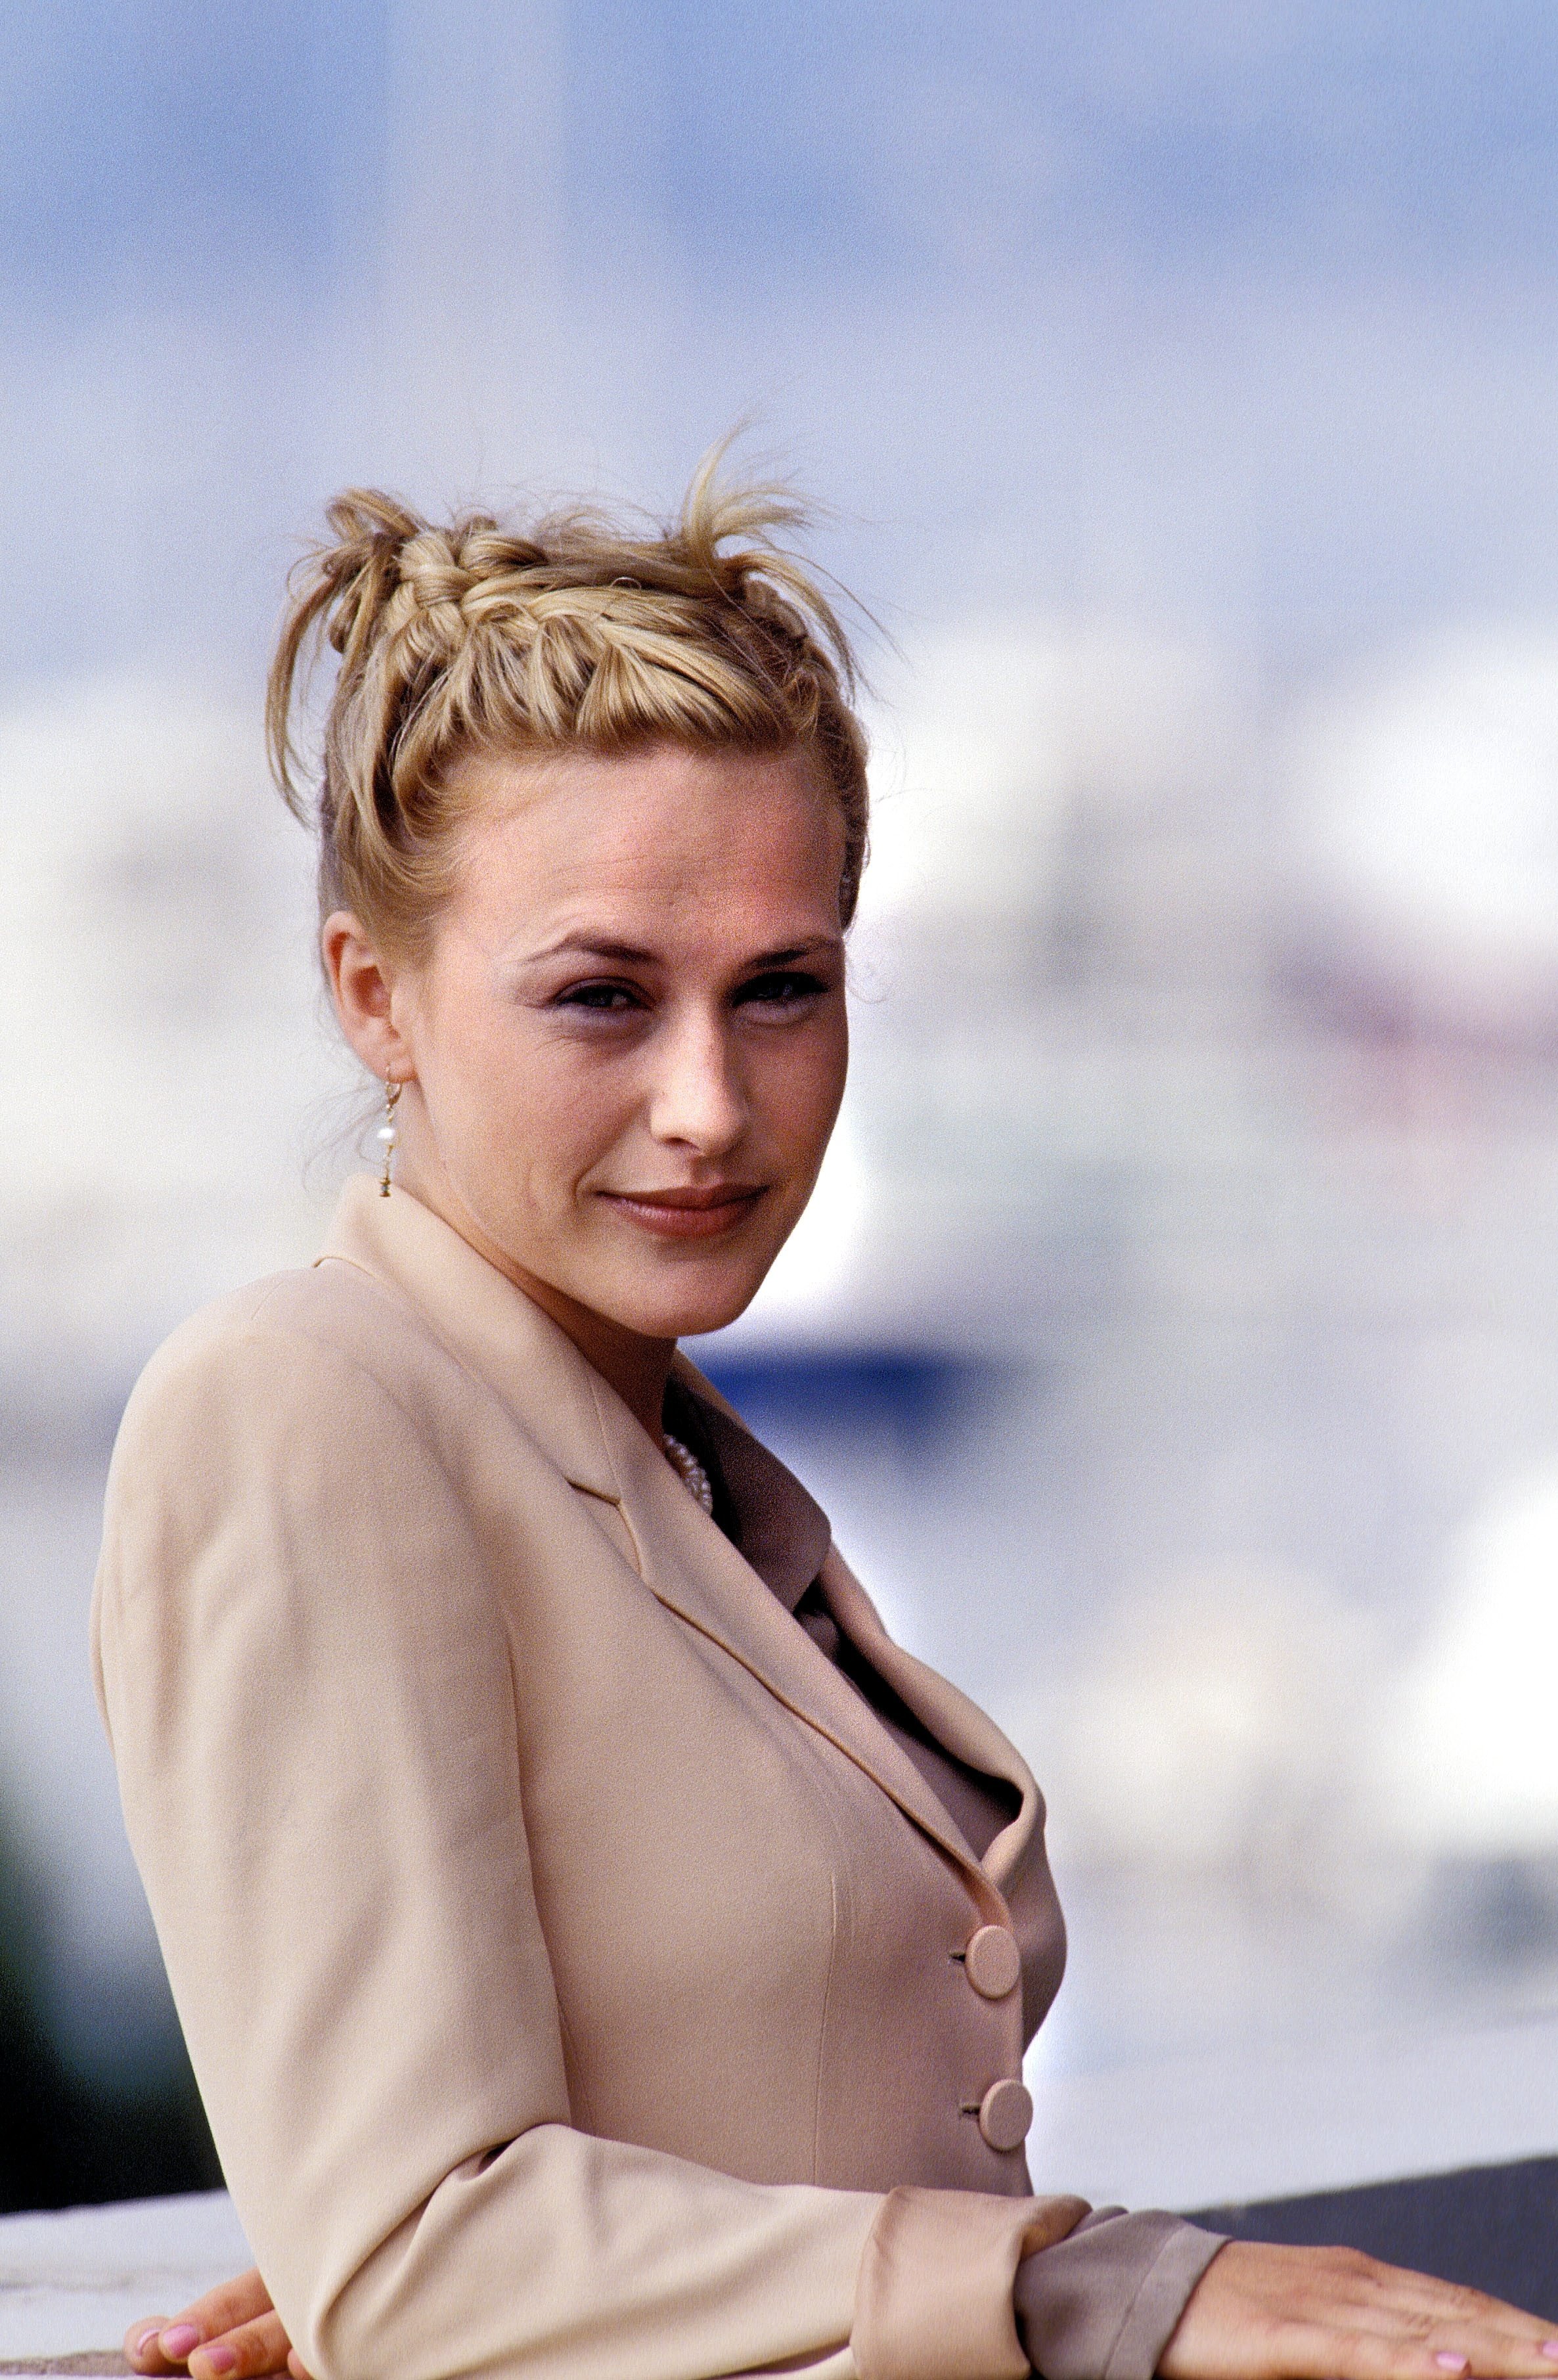 Patricia Arquette in a photocall for "Beyond Rangoon" in Cannes, France, on May 19, 1995. | Source: Pool BENAINOUS/DUCLOS/Gamma-Rapho/Getty Images